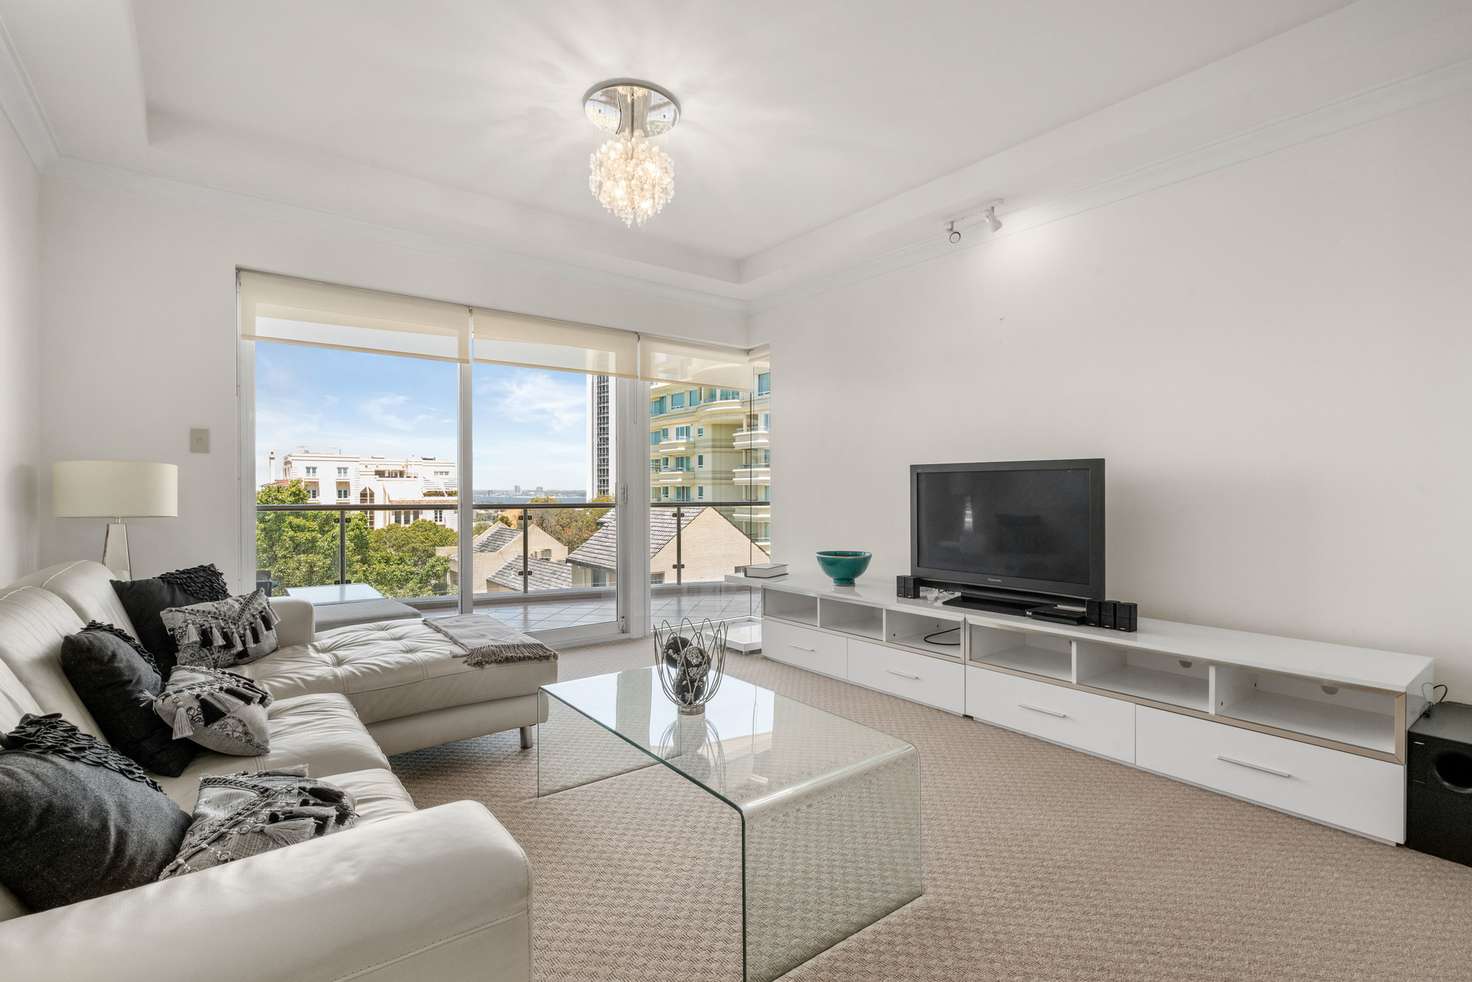 Main view of Homely apartment listing, 5/69 Malcolm Street, West Perth WA 6005